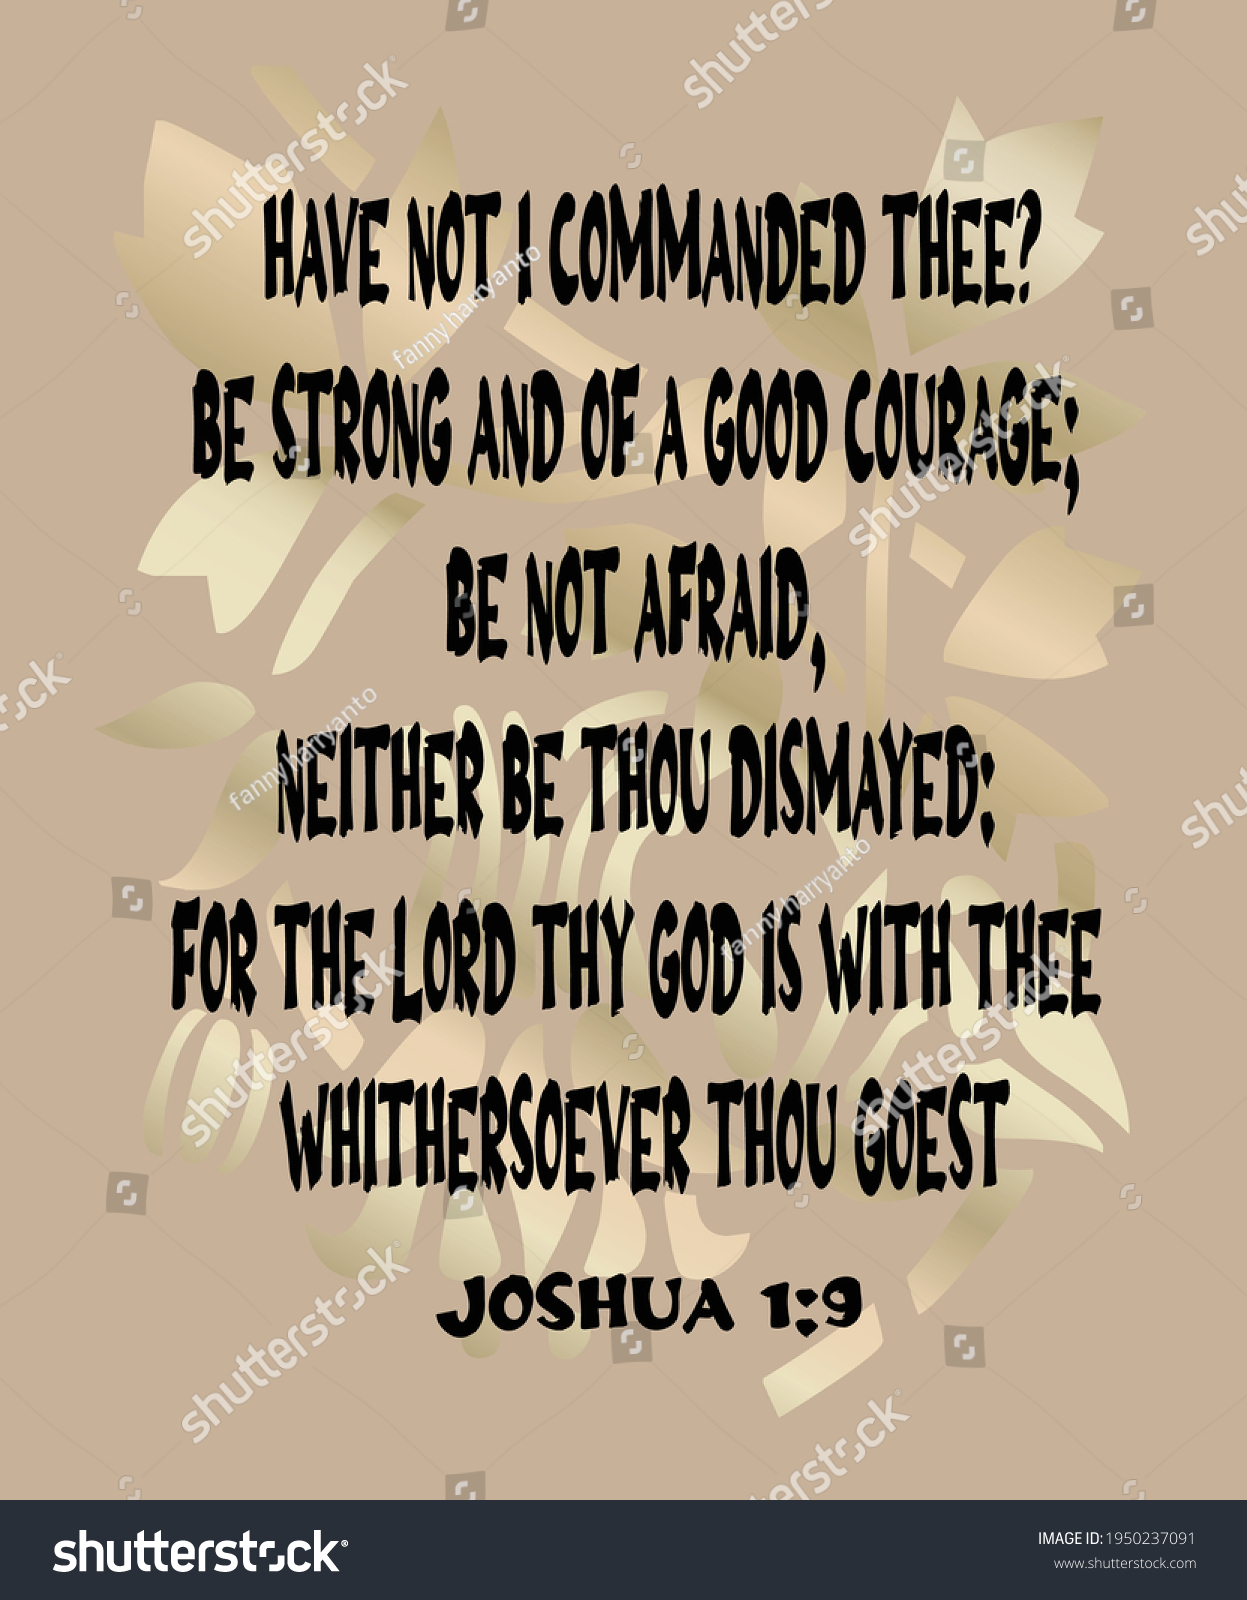 SVG of 
Bible verse. Joshua 1:9 Have not I commanded thee? Be strong and of a good courage; be not afraid, neither be thou dismayed: for the LORD thy God is with thee whithersoever thou goest. 

 svg